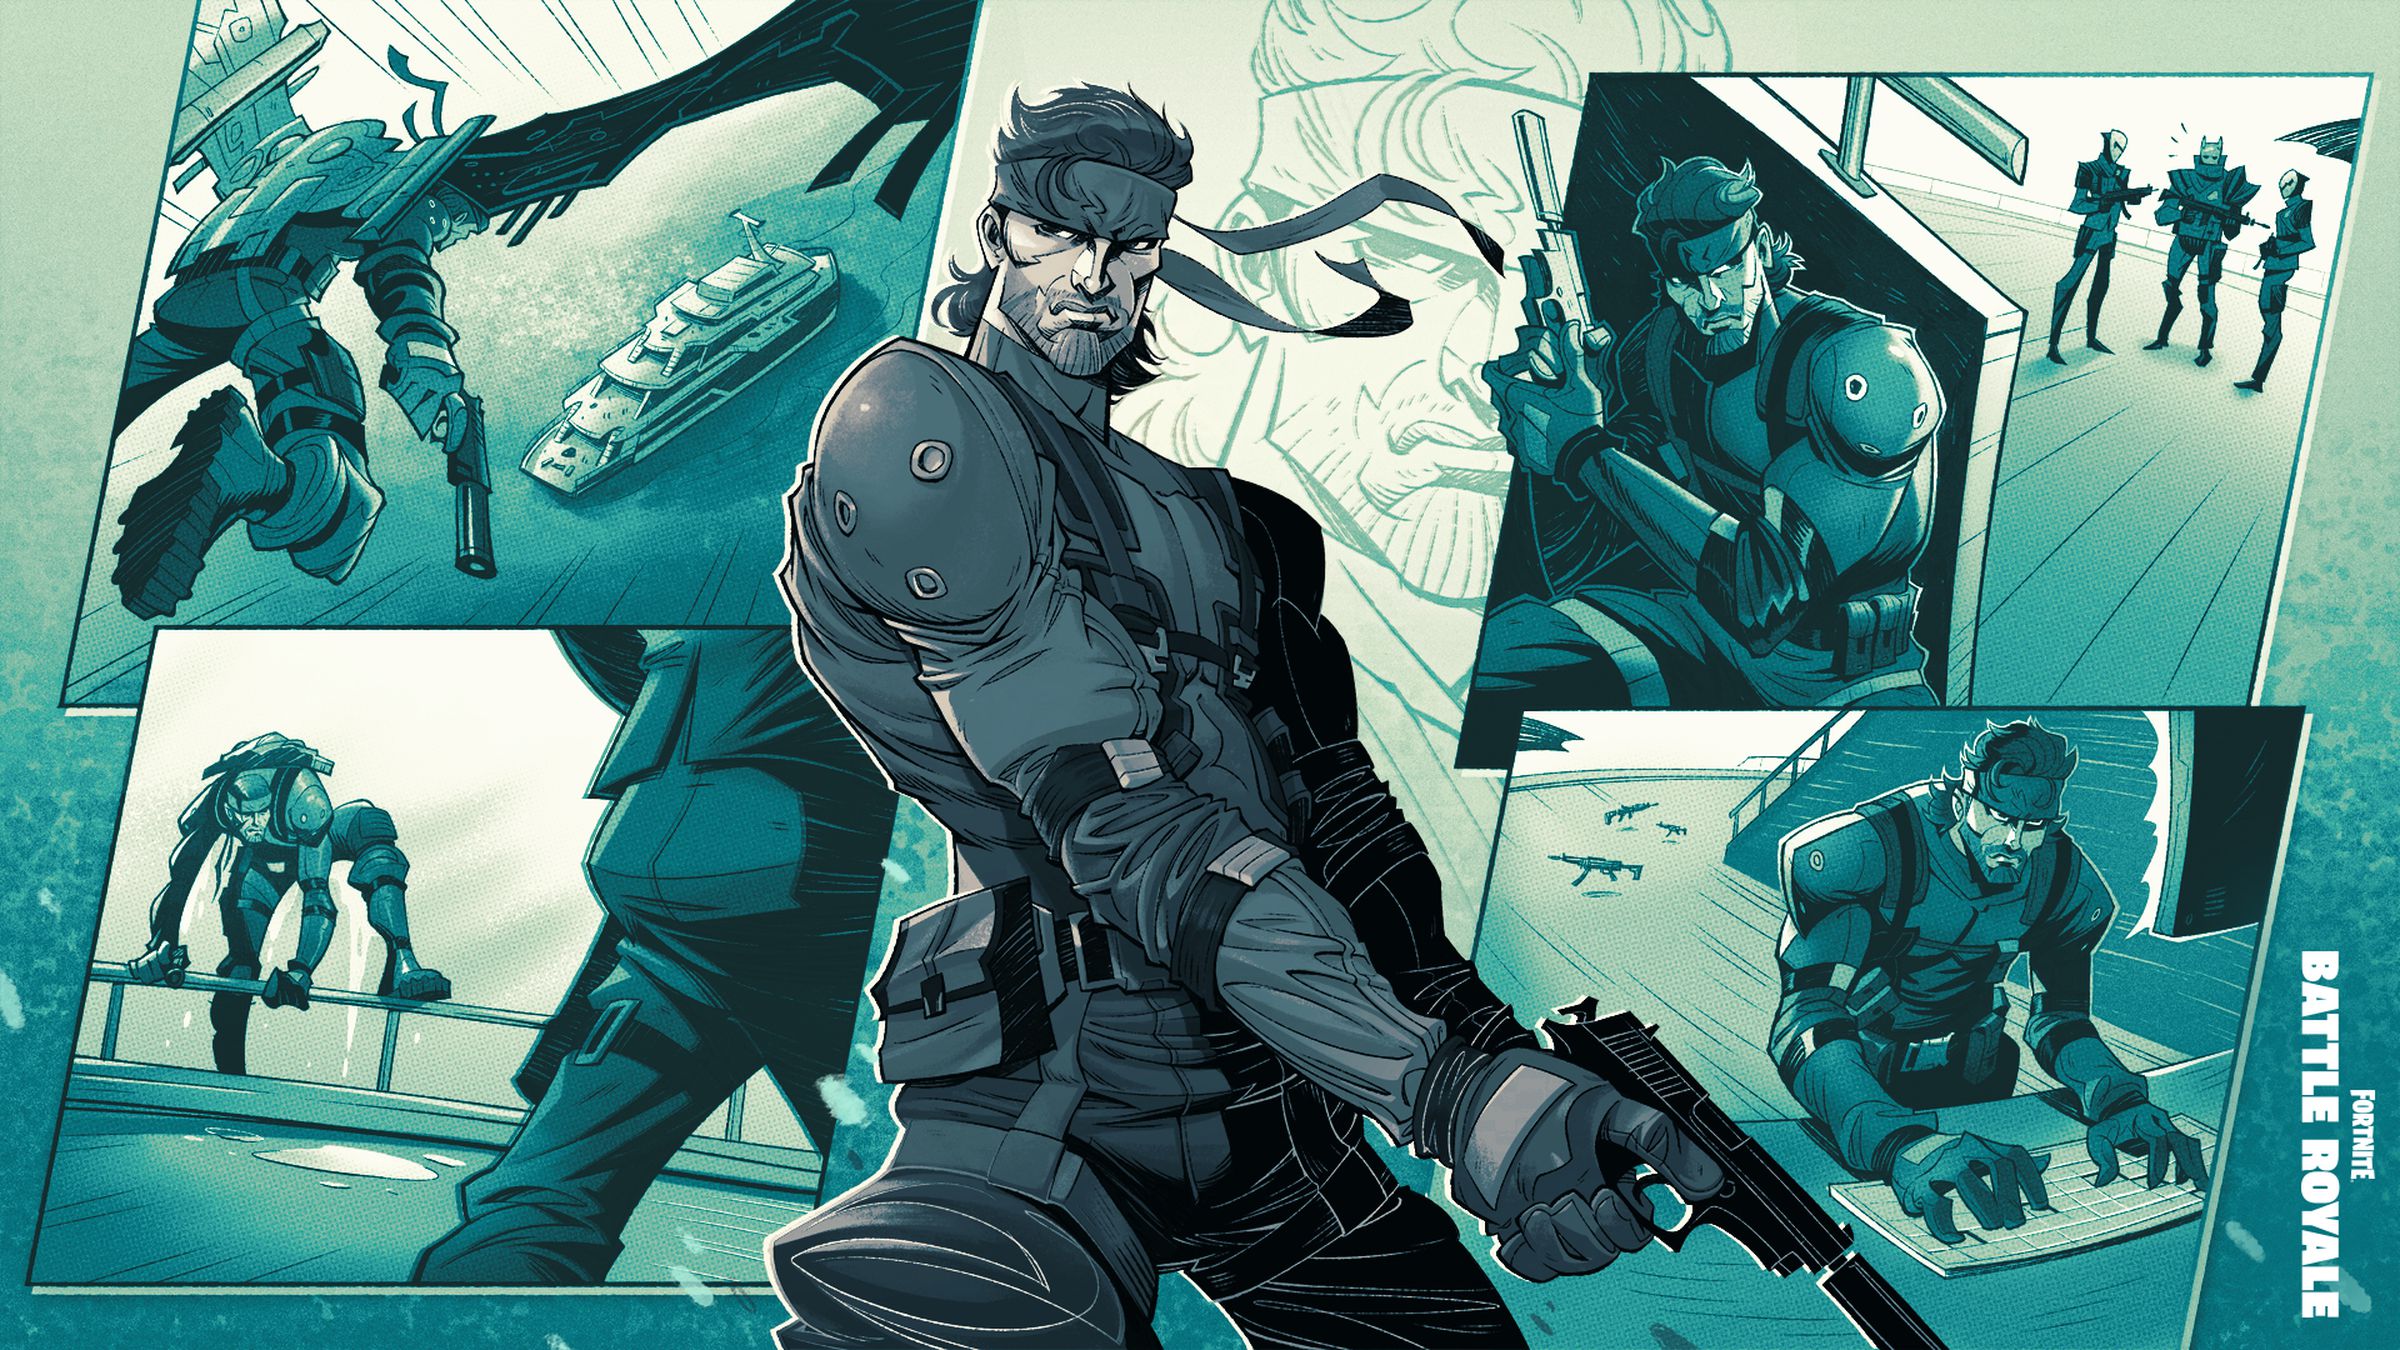 A comic book-style Fortnite loading screen featuring Solid Snake from Metal Gear Solid.